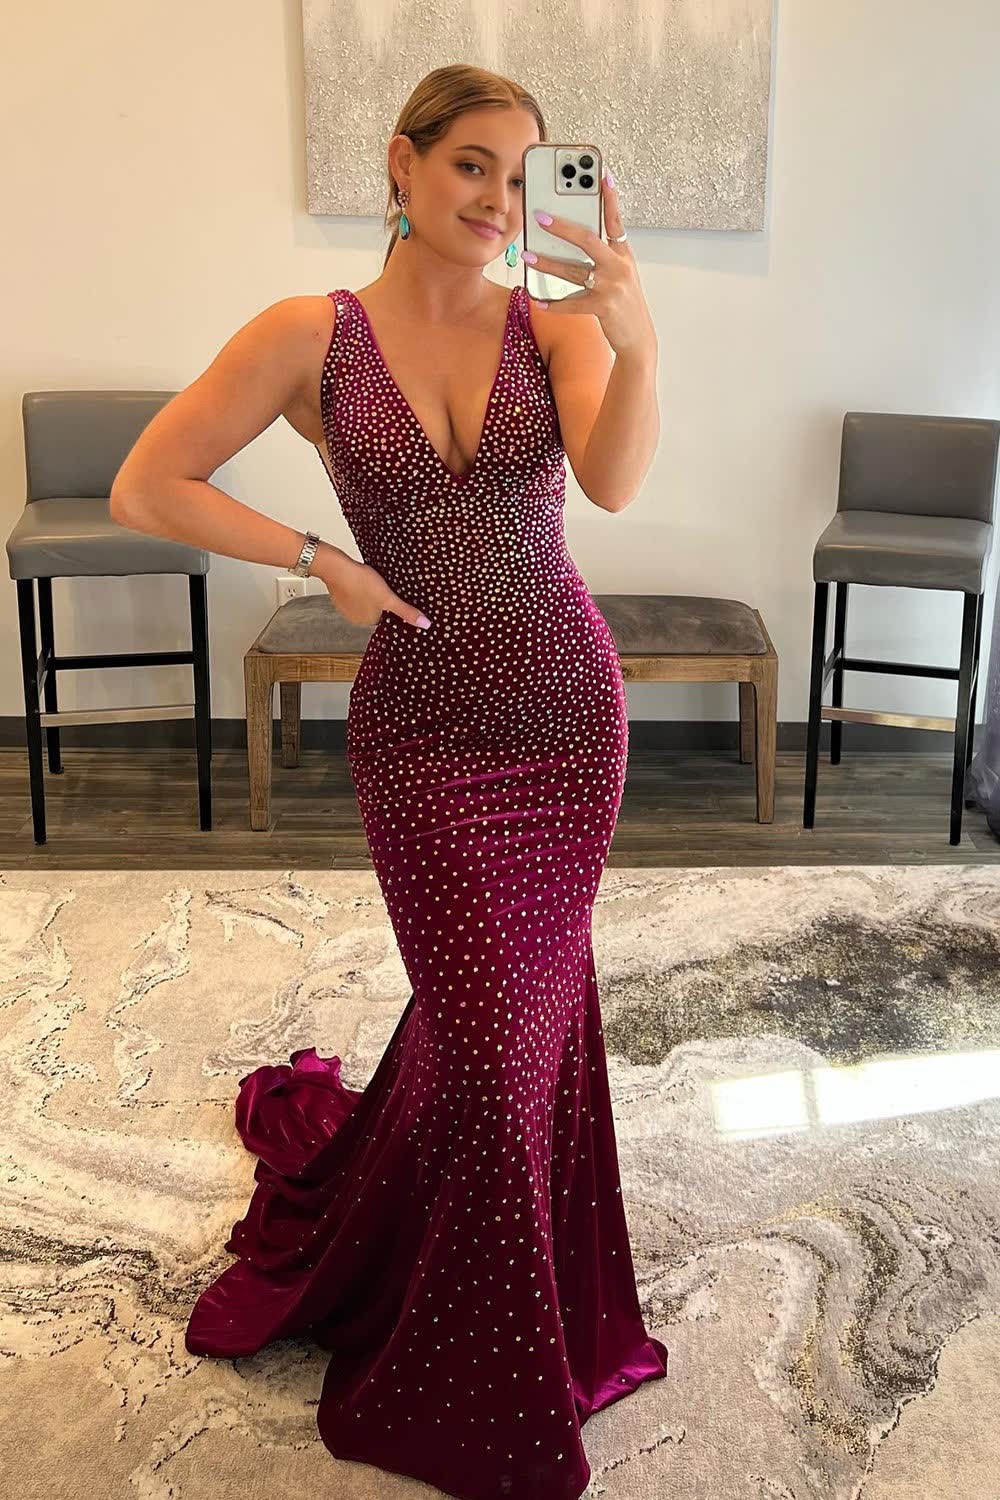 Sparkly Fuchsia Sequins Backless Mermaid Long Corset Prom Dress outfits, Sparkly Fuchsia Sequins Backless Mermaid Long Prom Dress